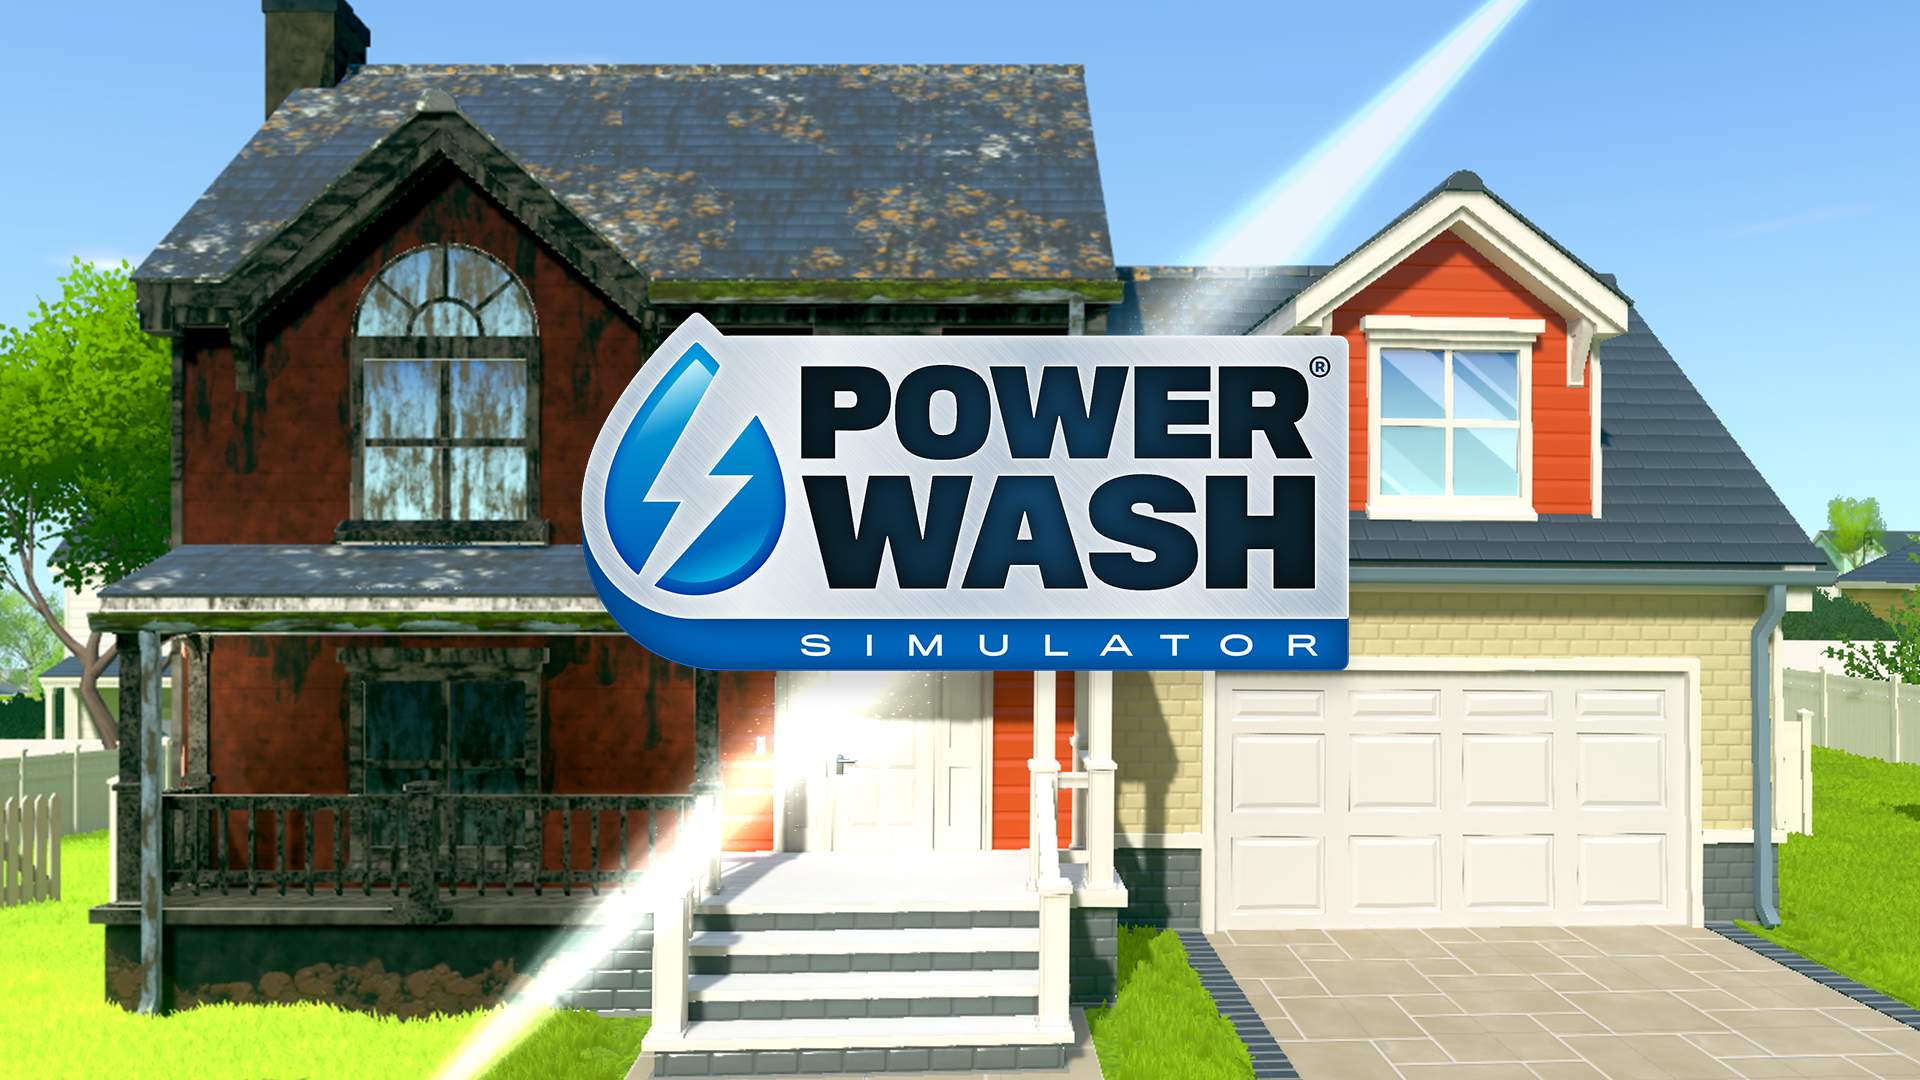 Release the Pressure - PowerWash Simulator is on Steam® Early Access!